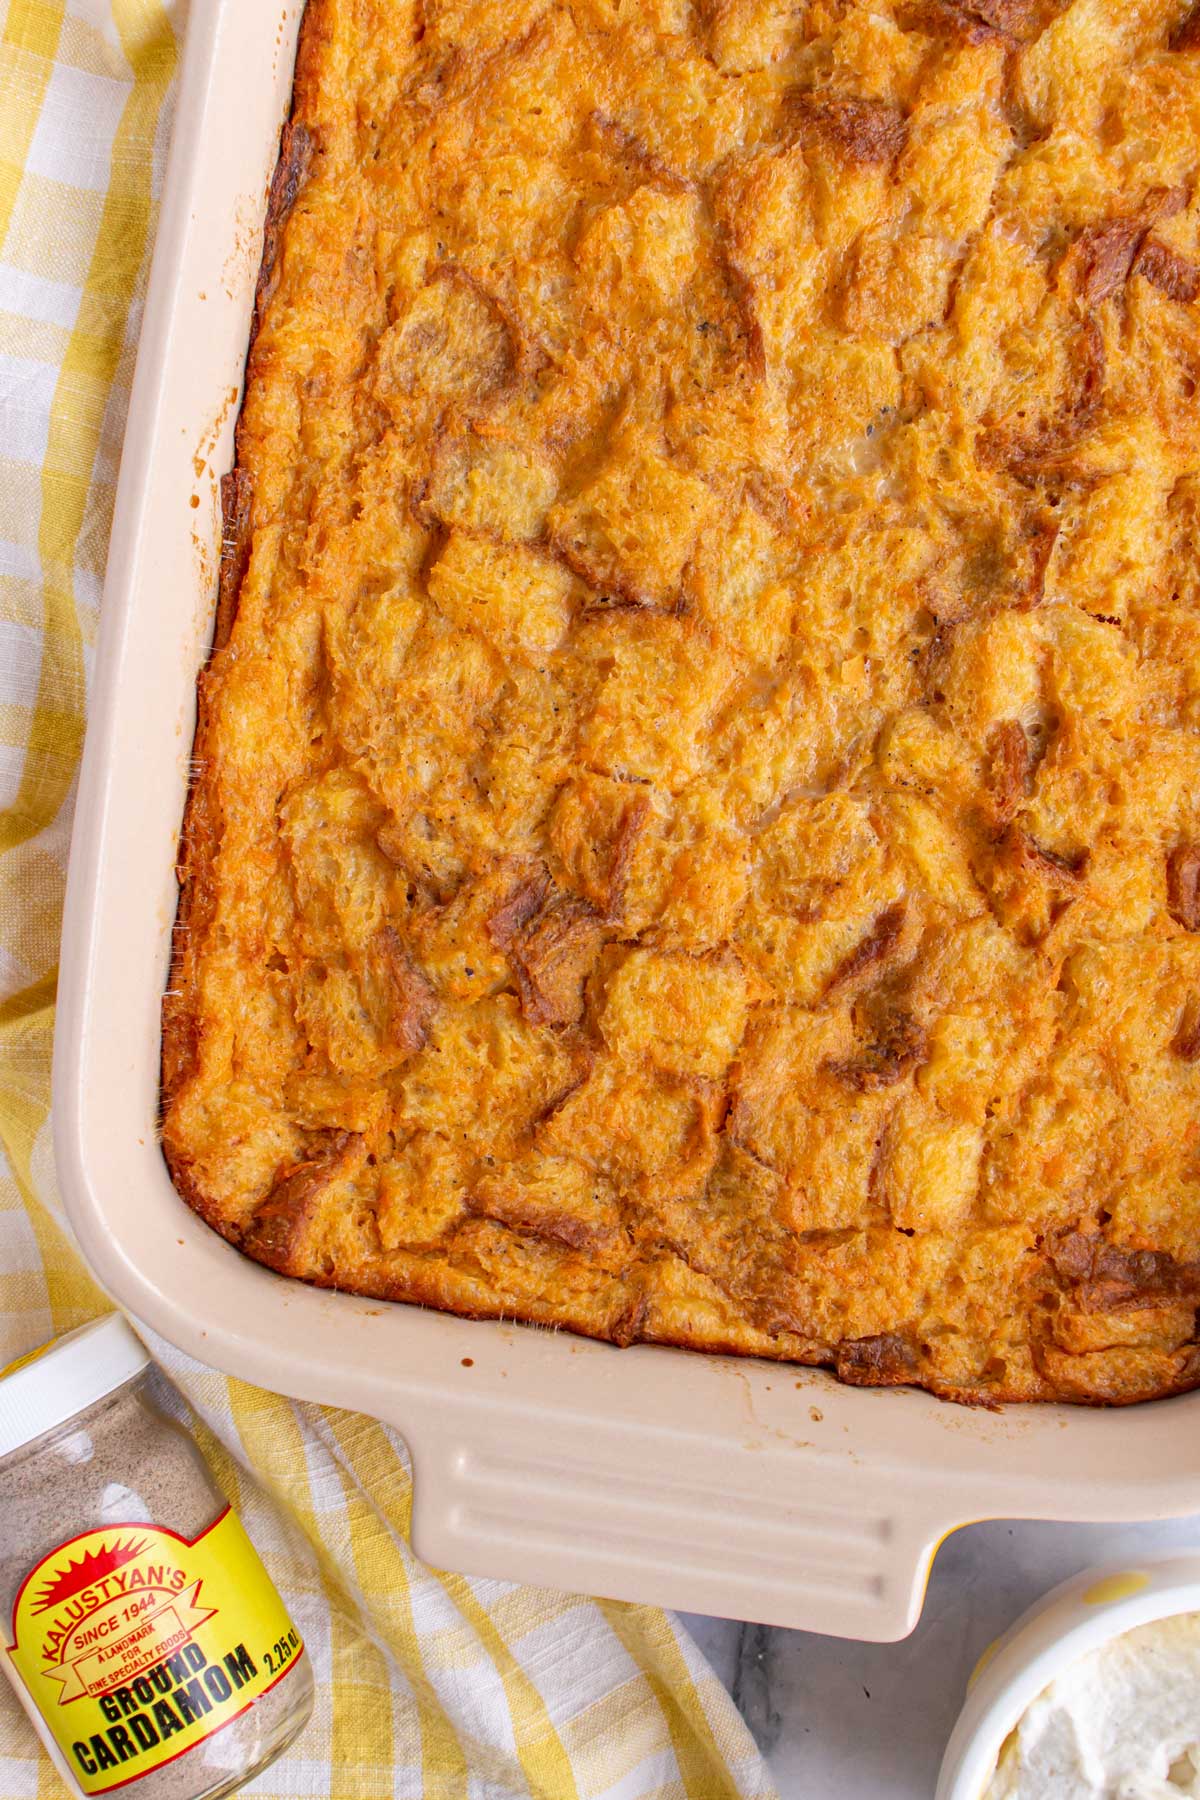 Sweet potato bread pudding in a casserole dish next to a small jar of ground cardamom.